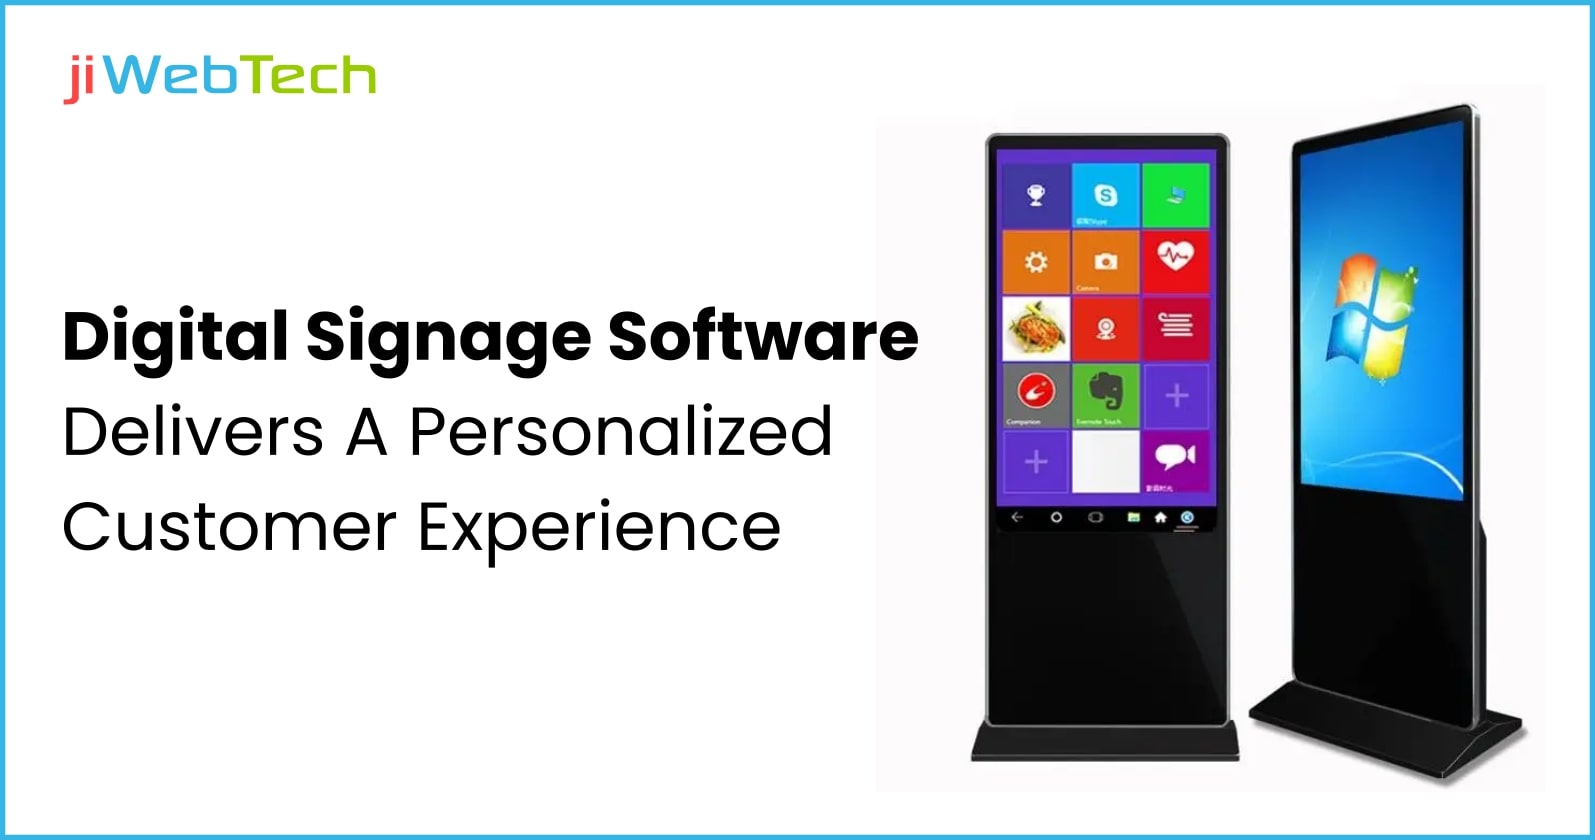 Digital Signage Software Delivers A Personalized Customer Experience